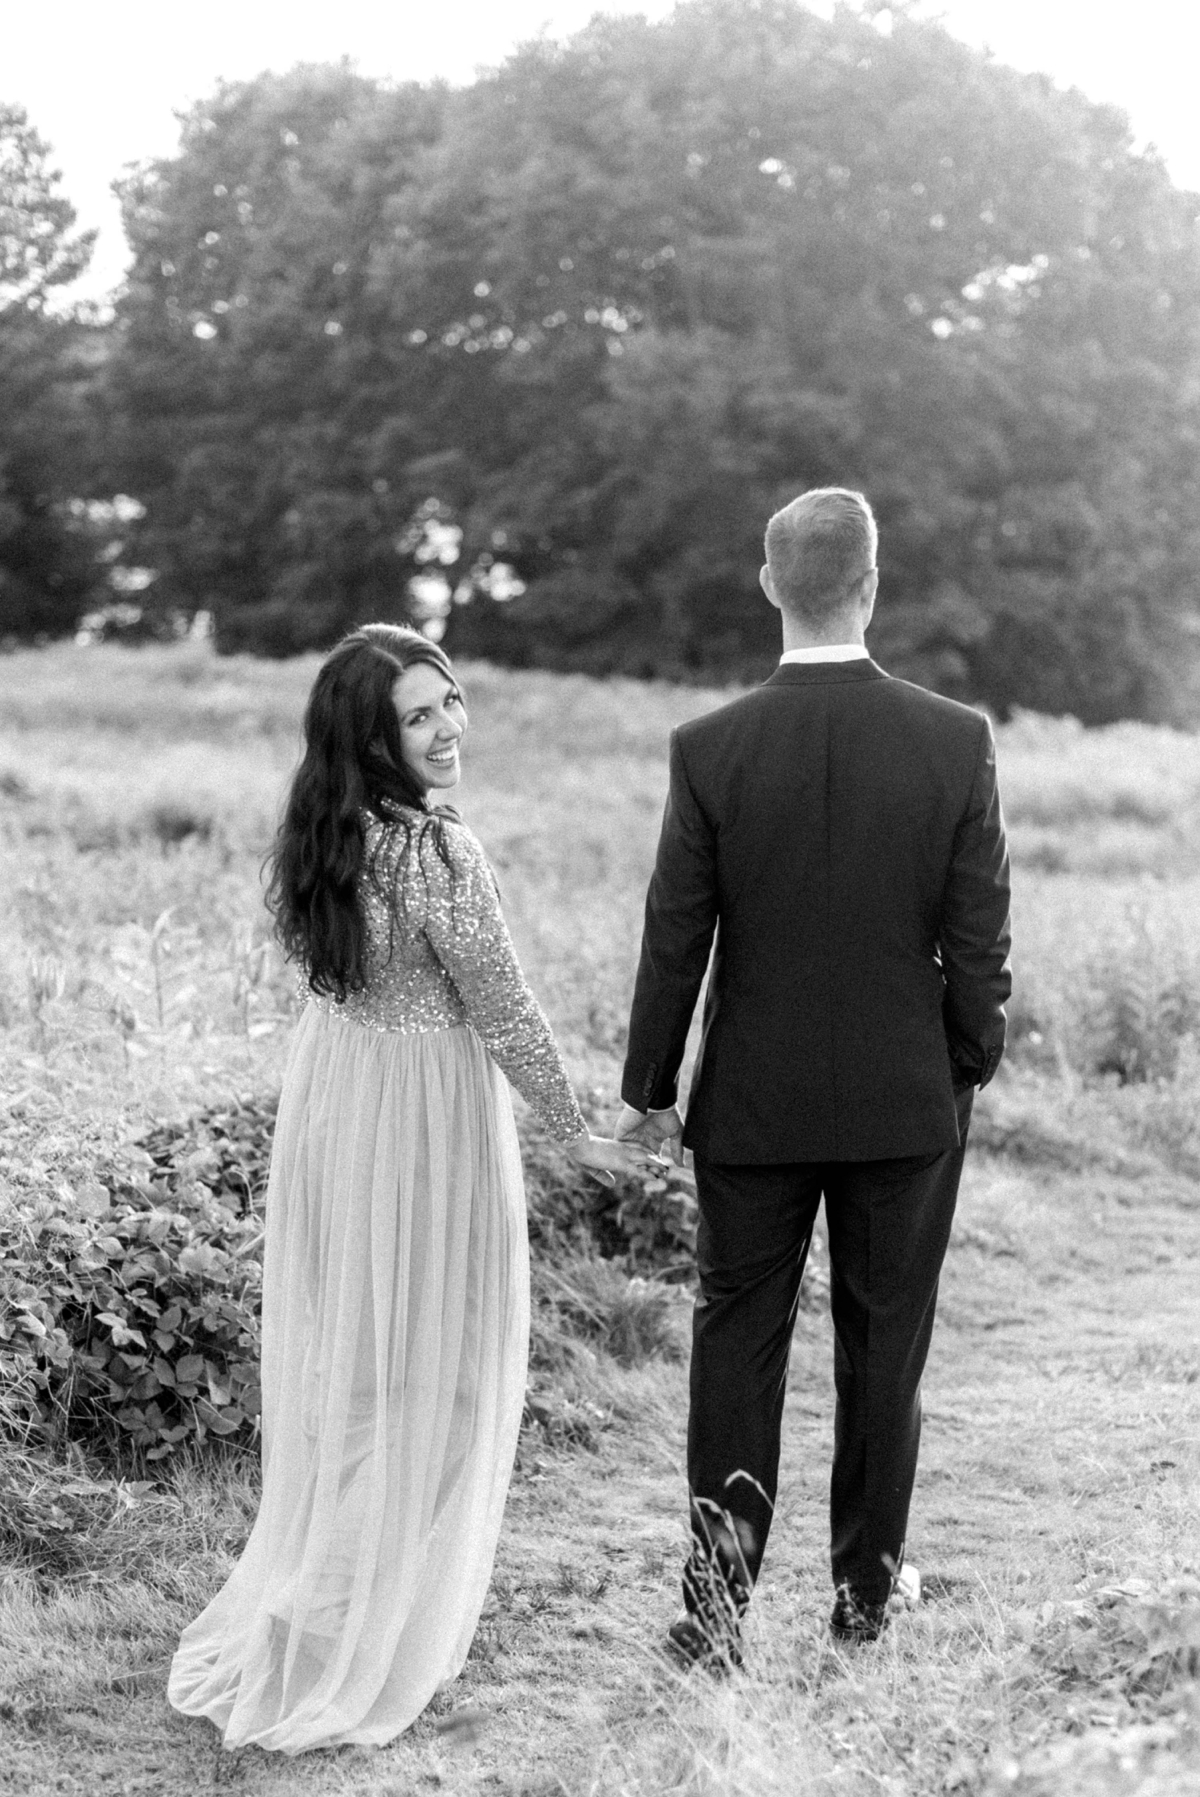 Romantic & Formal Wagon Hill Farm Anniversary Session in Durham, New Hampshire by Boston Wedding Photographer Annmarie Swift